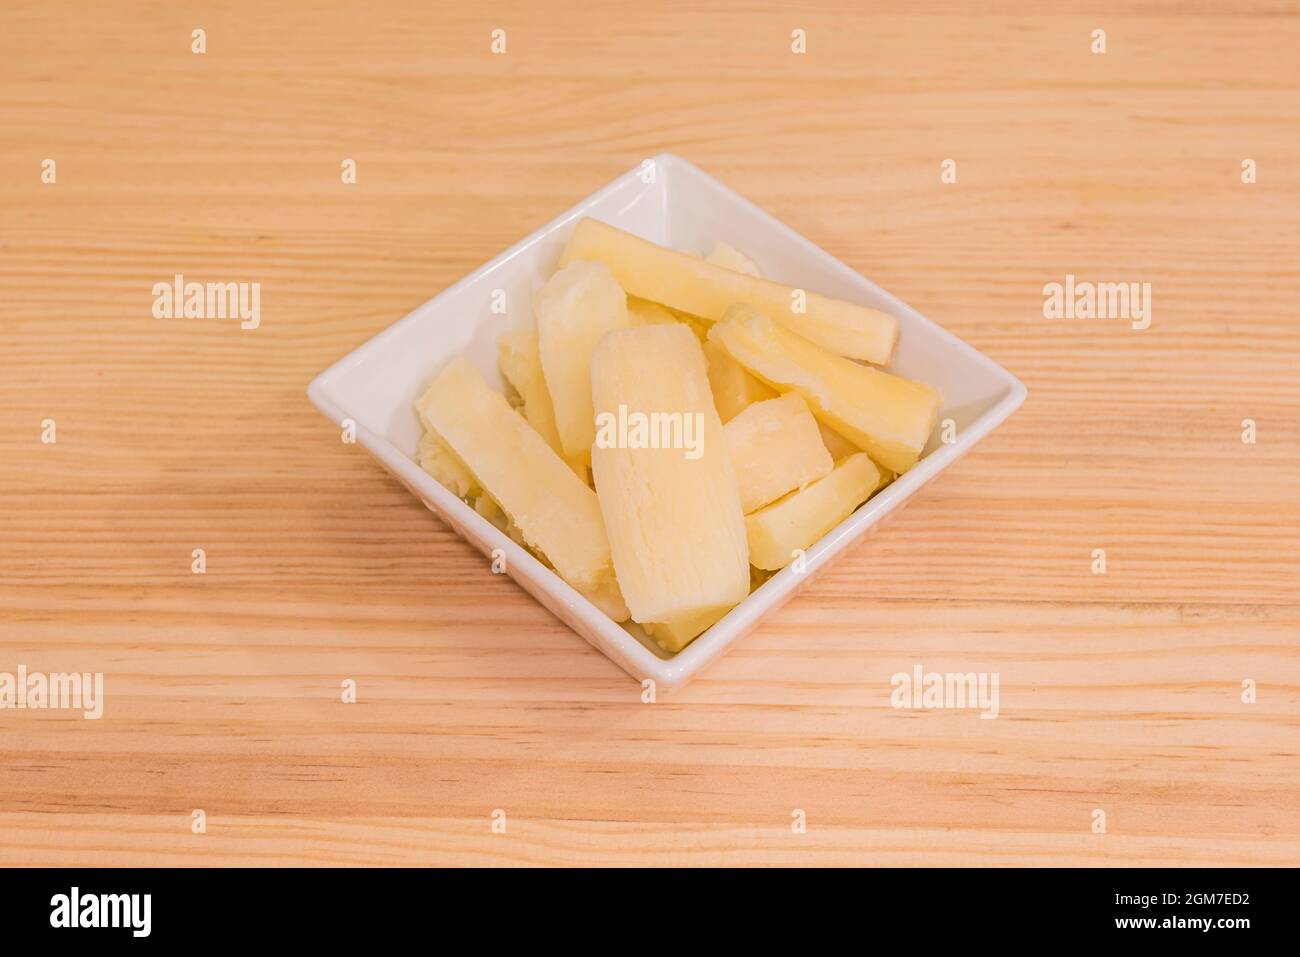 white square bowl filled with fried yucca pieces on wooden table Stock Photo